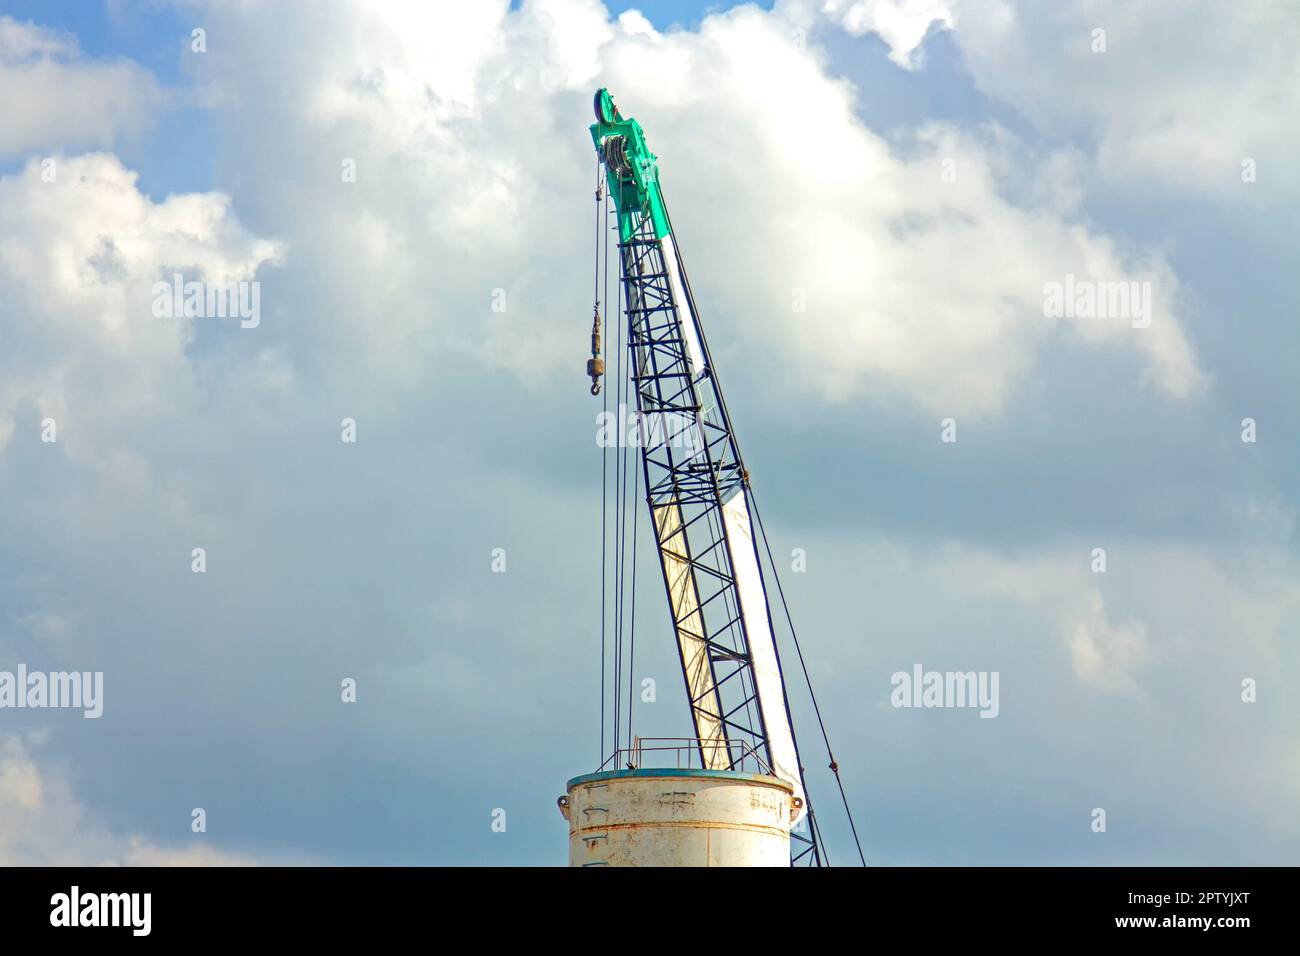 Crane lift green working In the blue sky backgound Stock Photo